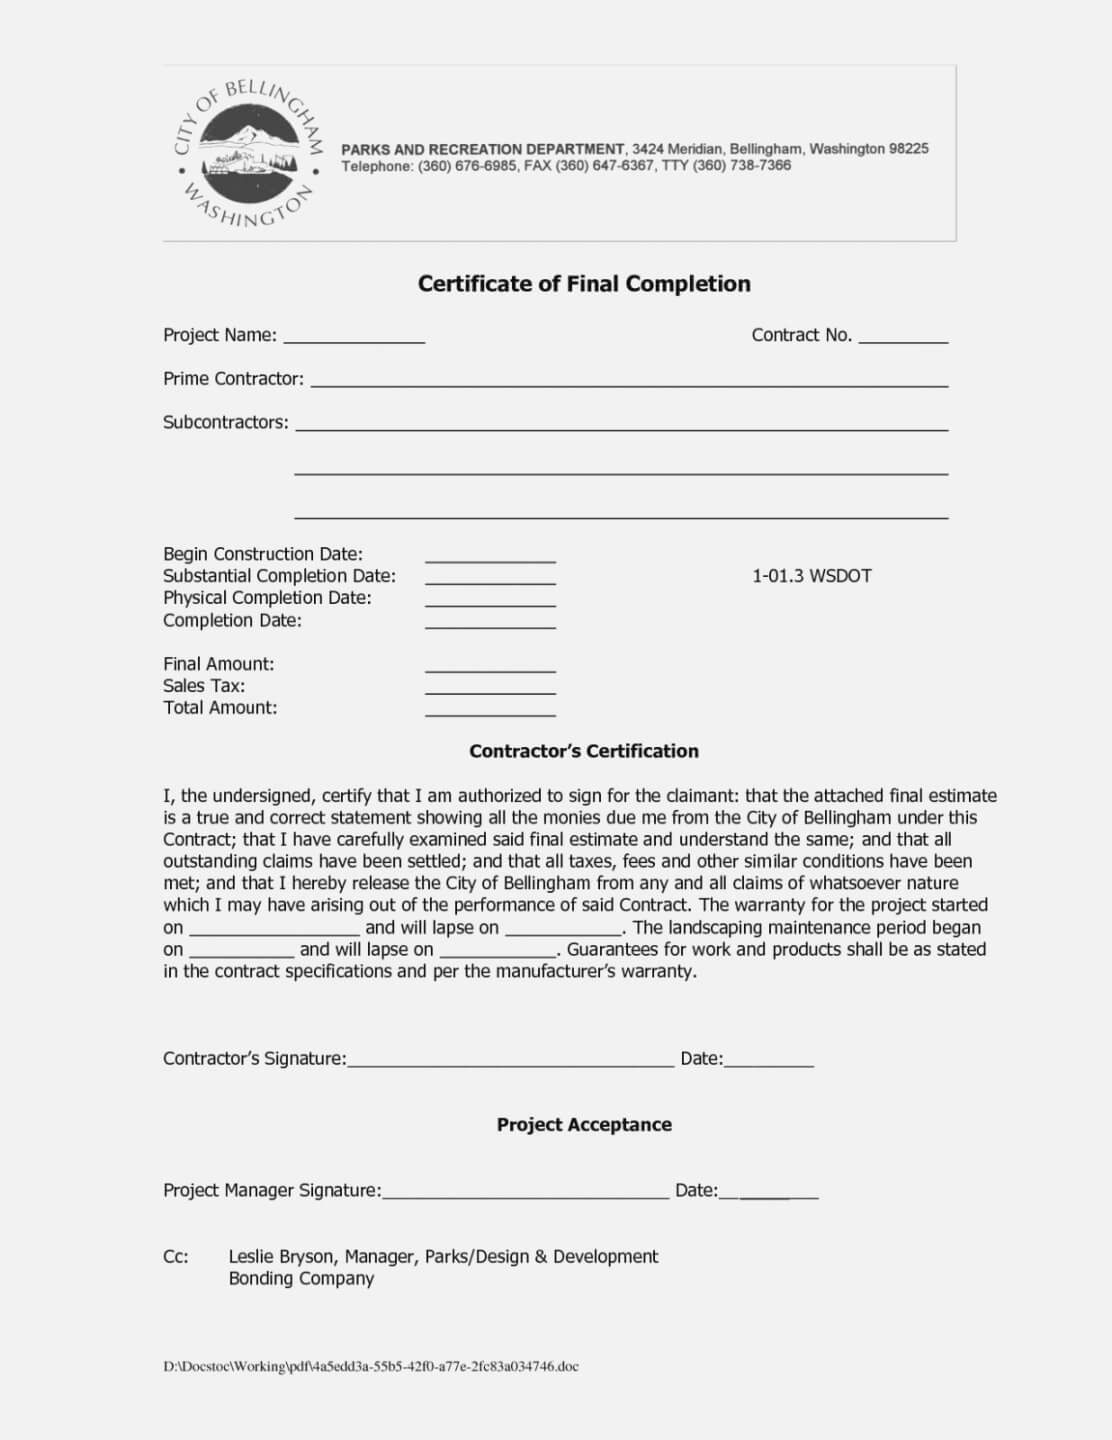 Printable Roofing Certificate Of Completion Template With Regard To Roof Certification Template